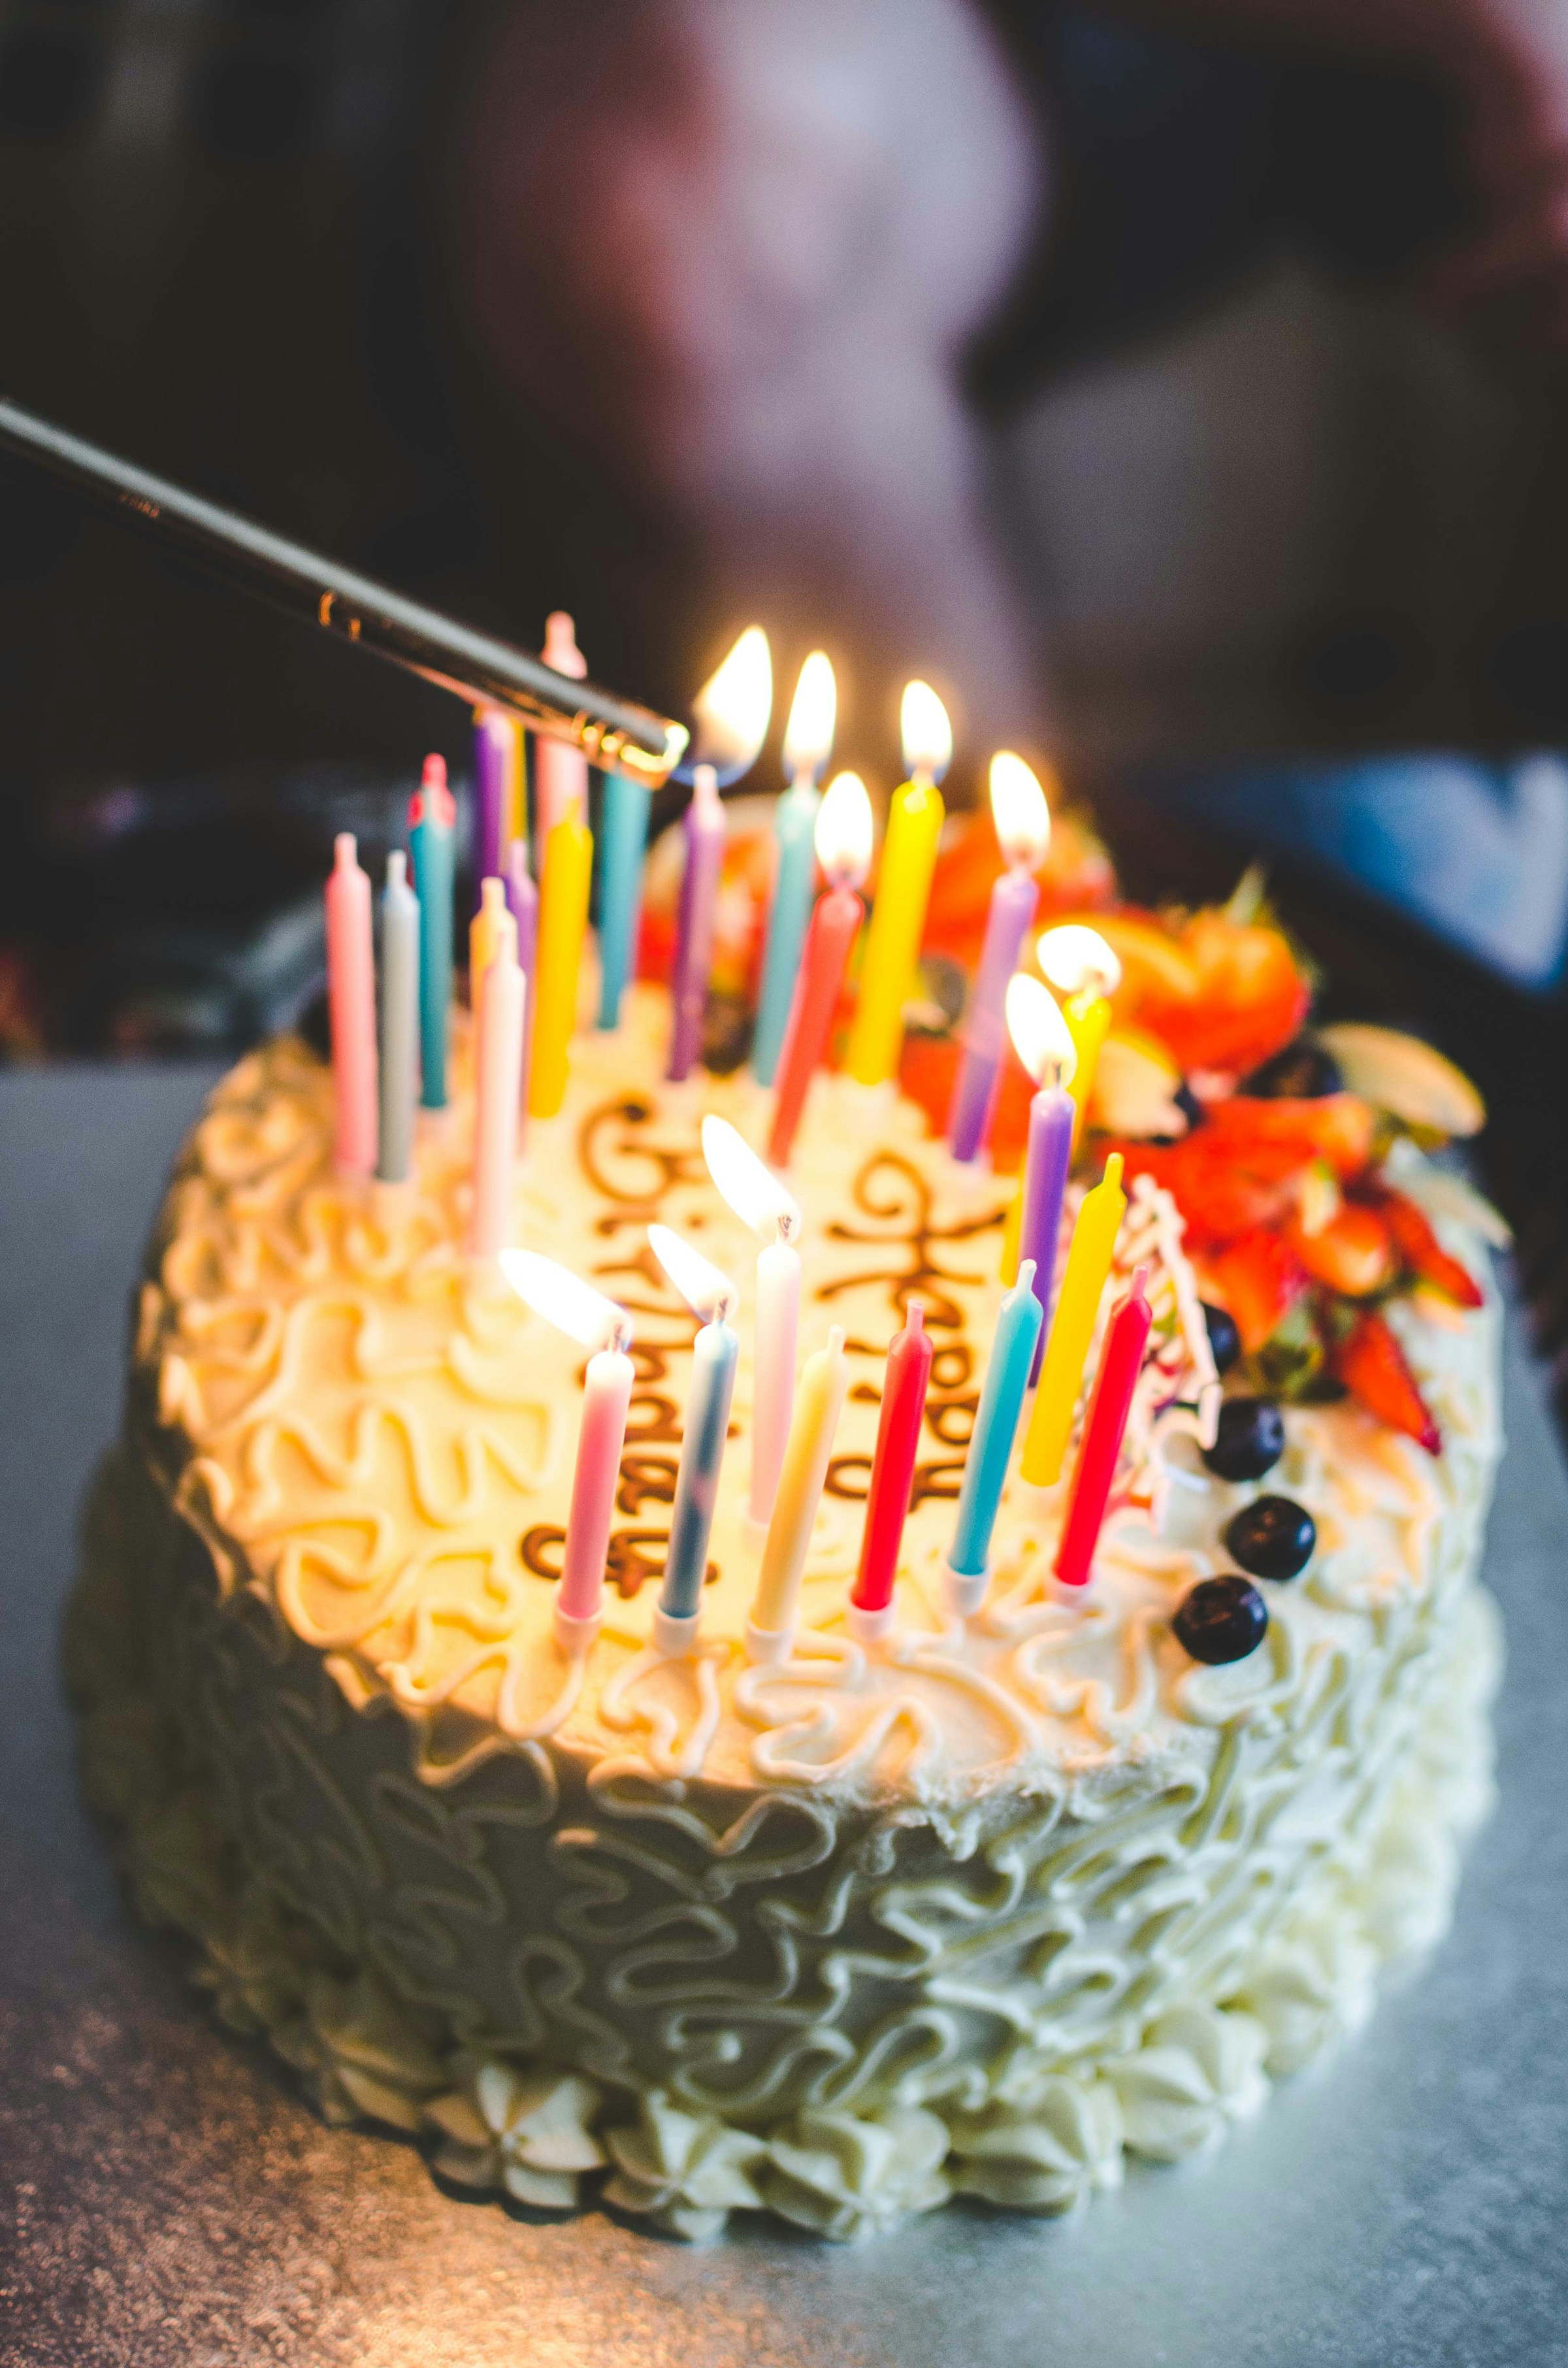 Birthday cake with candles | Source: Unsplash